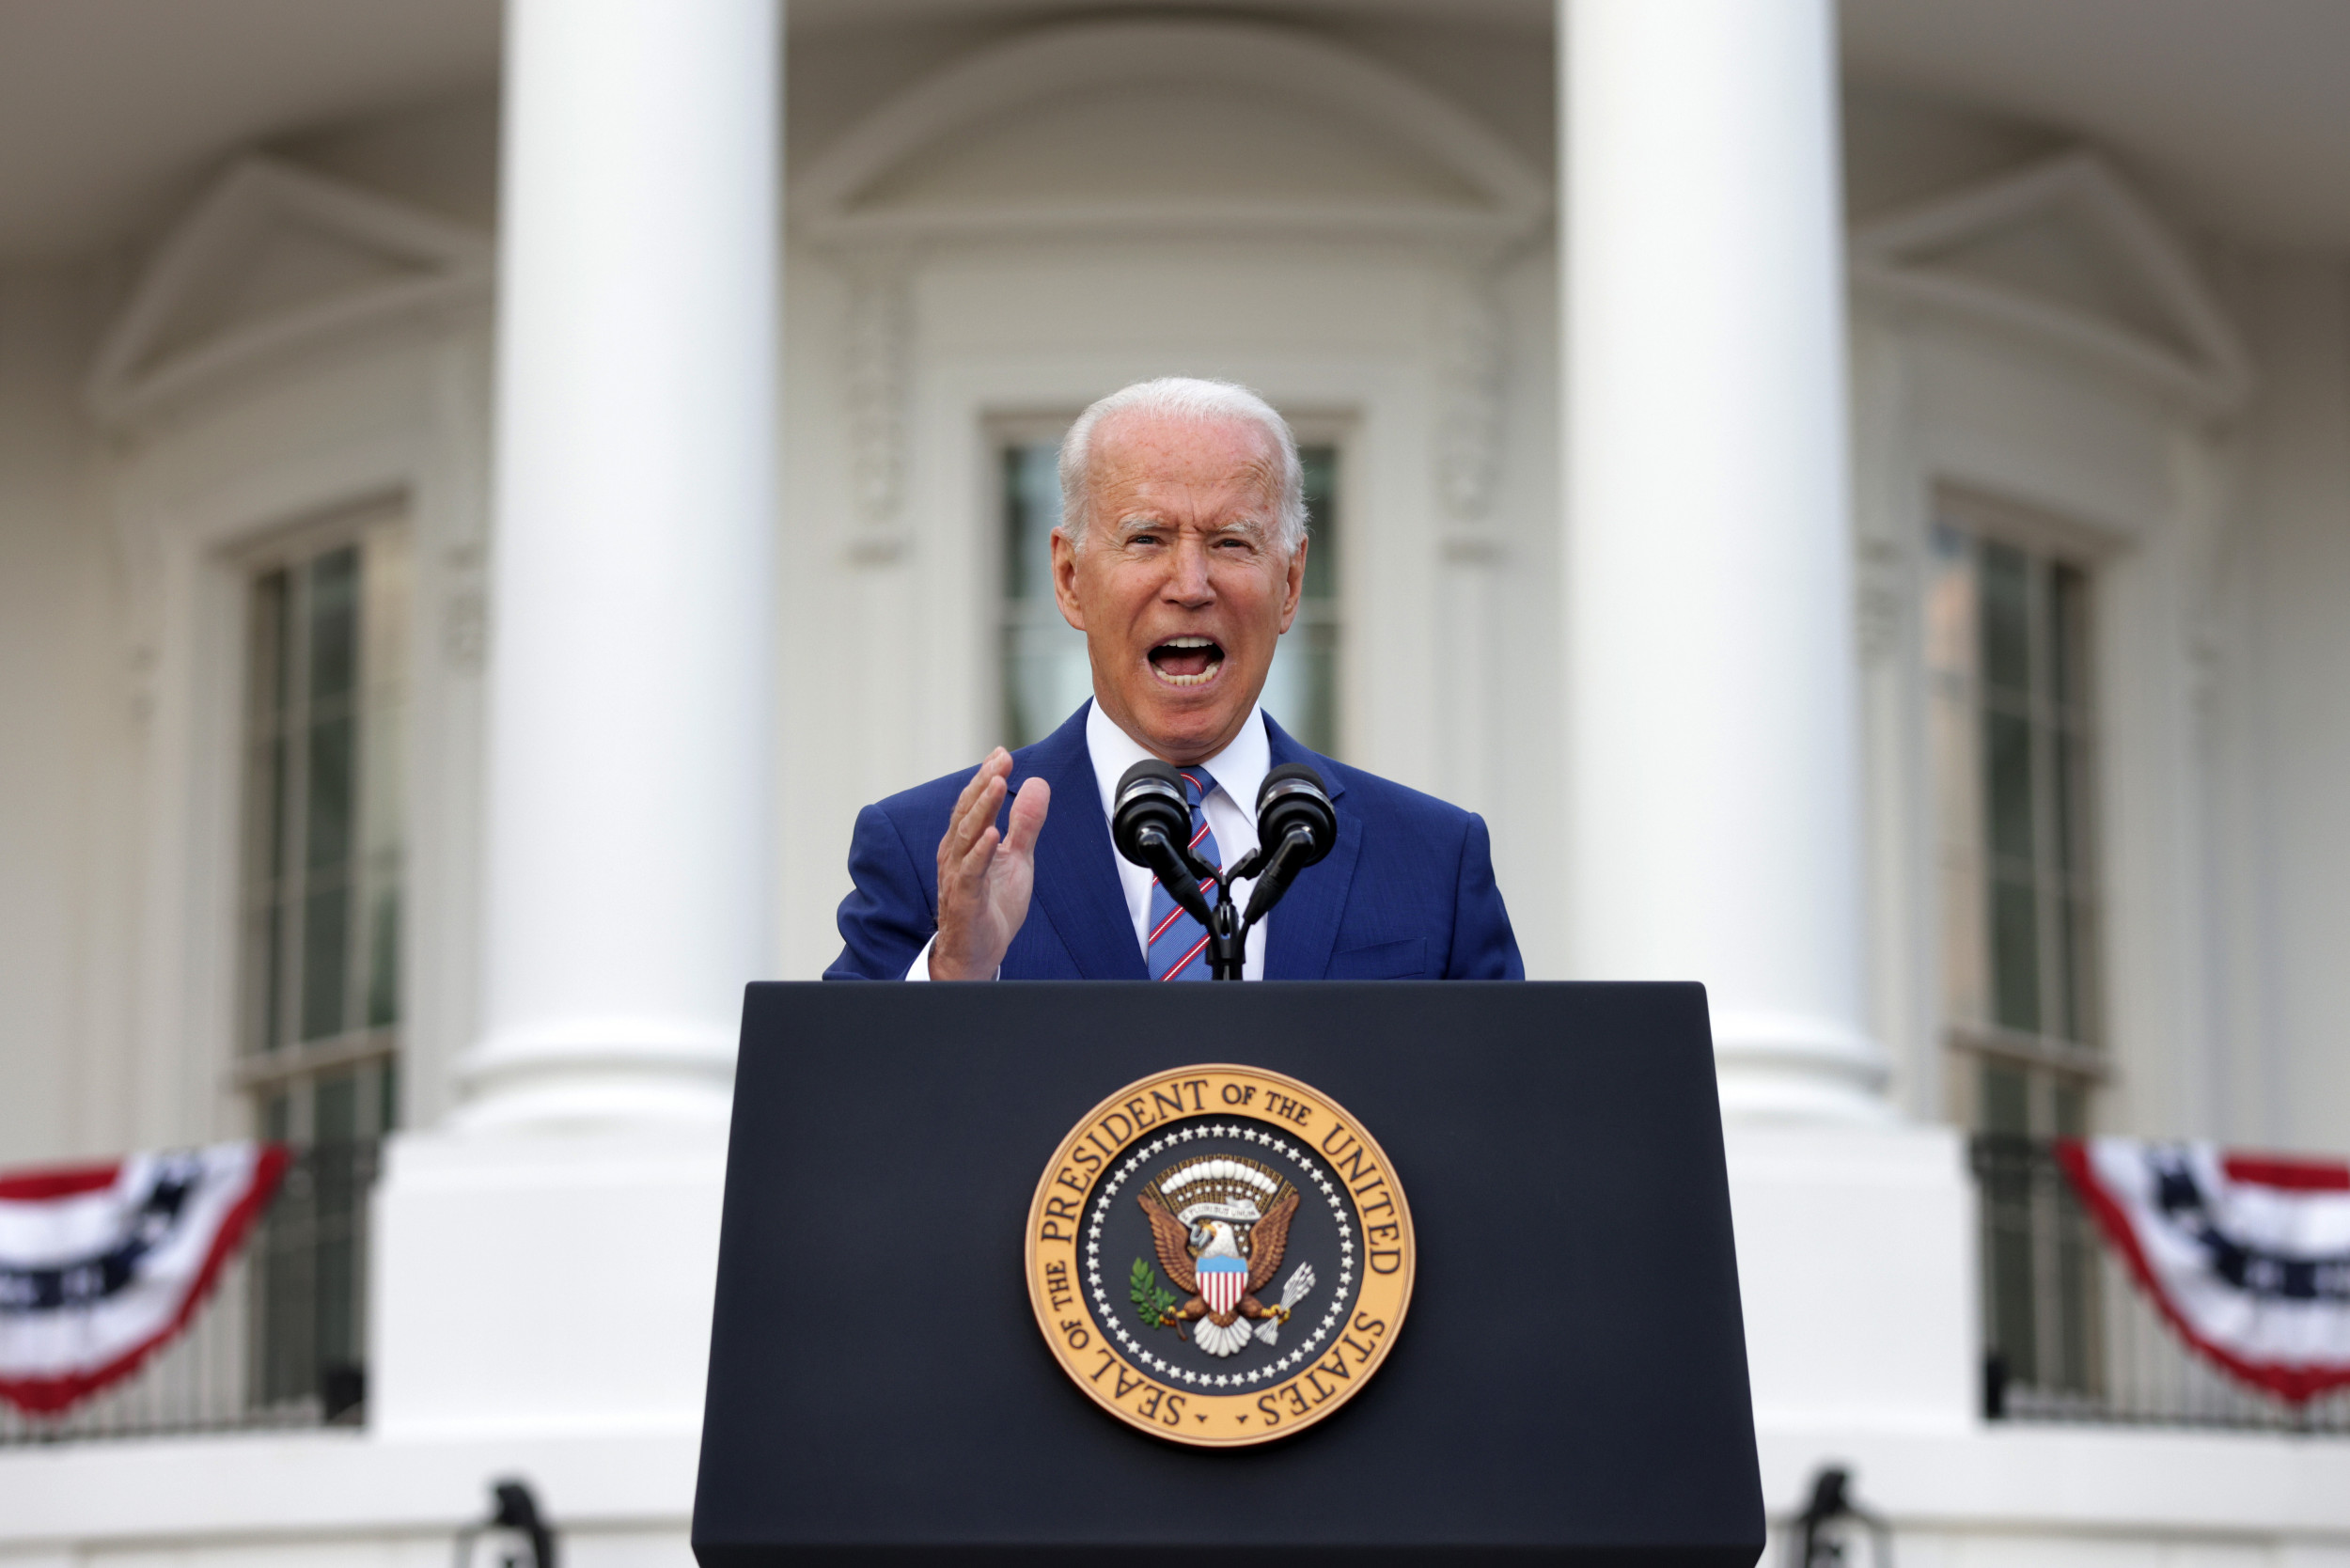 Joe Biden Welcomes America 'Coming Back Together'—But Ideological Chasms Remain thumbnail